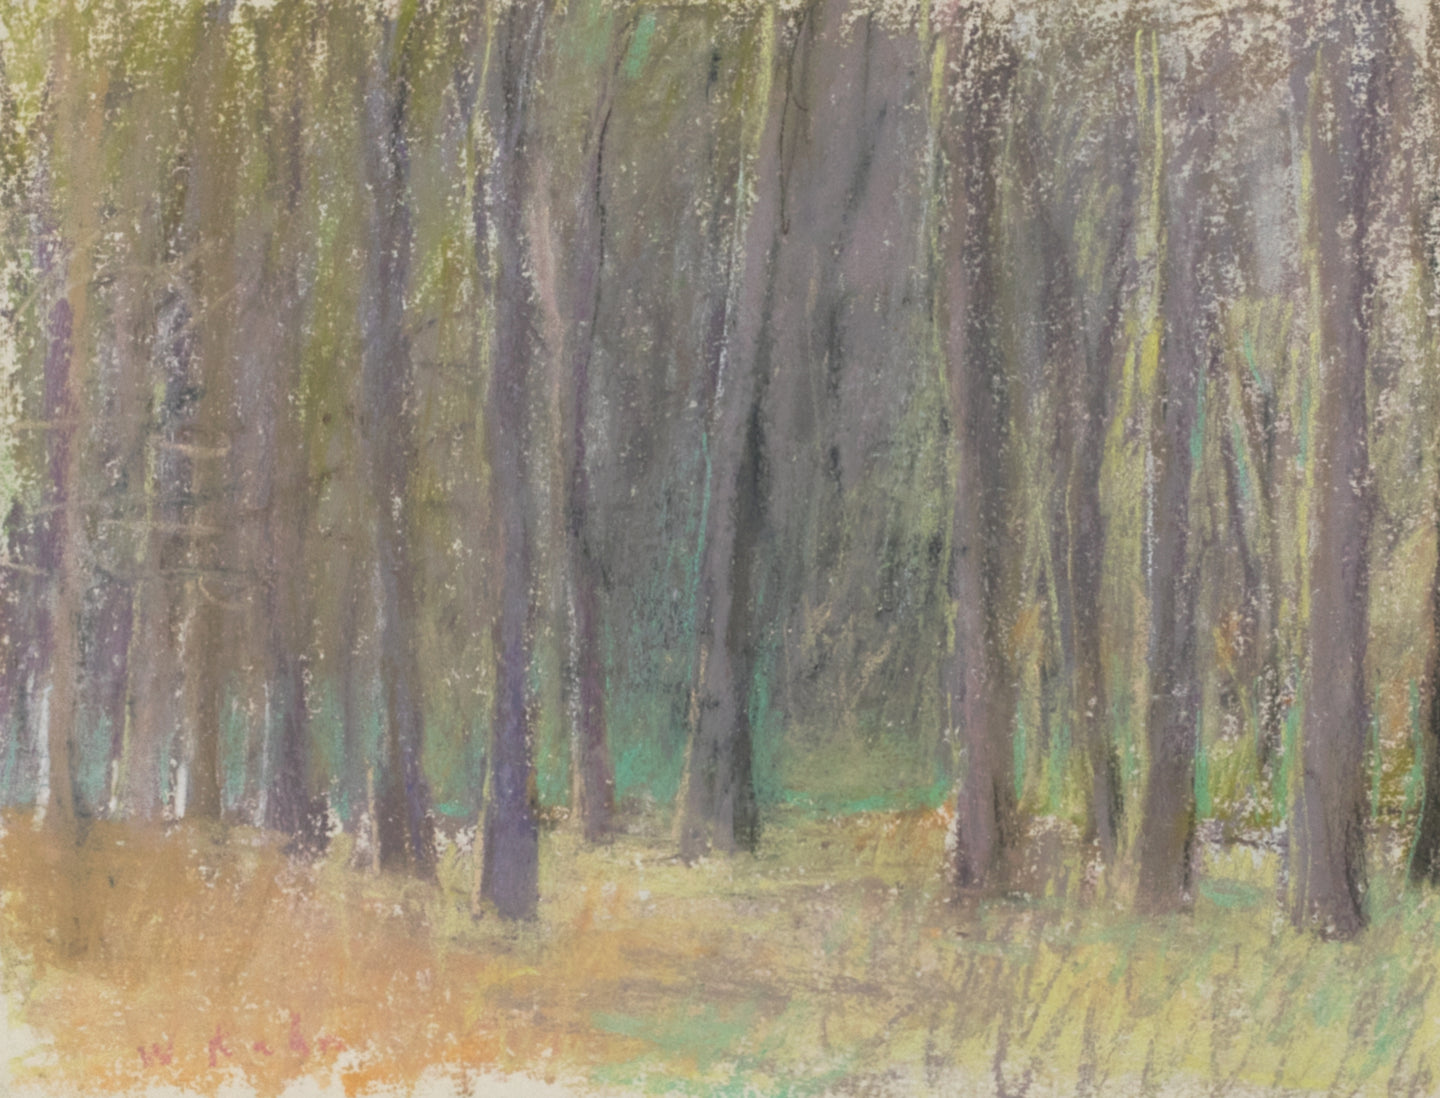 Wolf Kahn (1927-2020) Oaks, 1988  Pastel on paper  9 x 12 inches (unframed) This isi landscape of trees with greens and yellow, Available at Manolis Projects Gallery